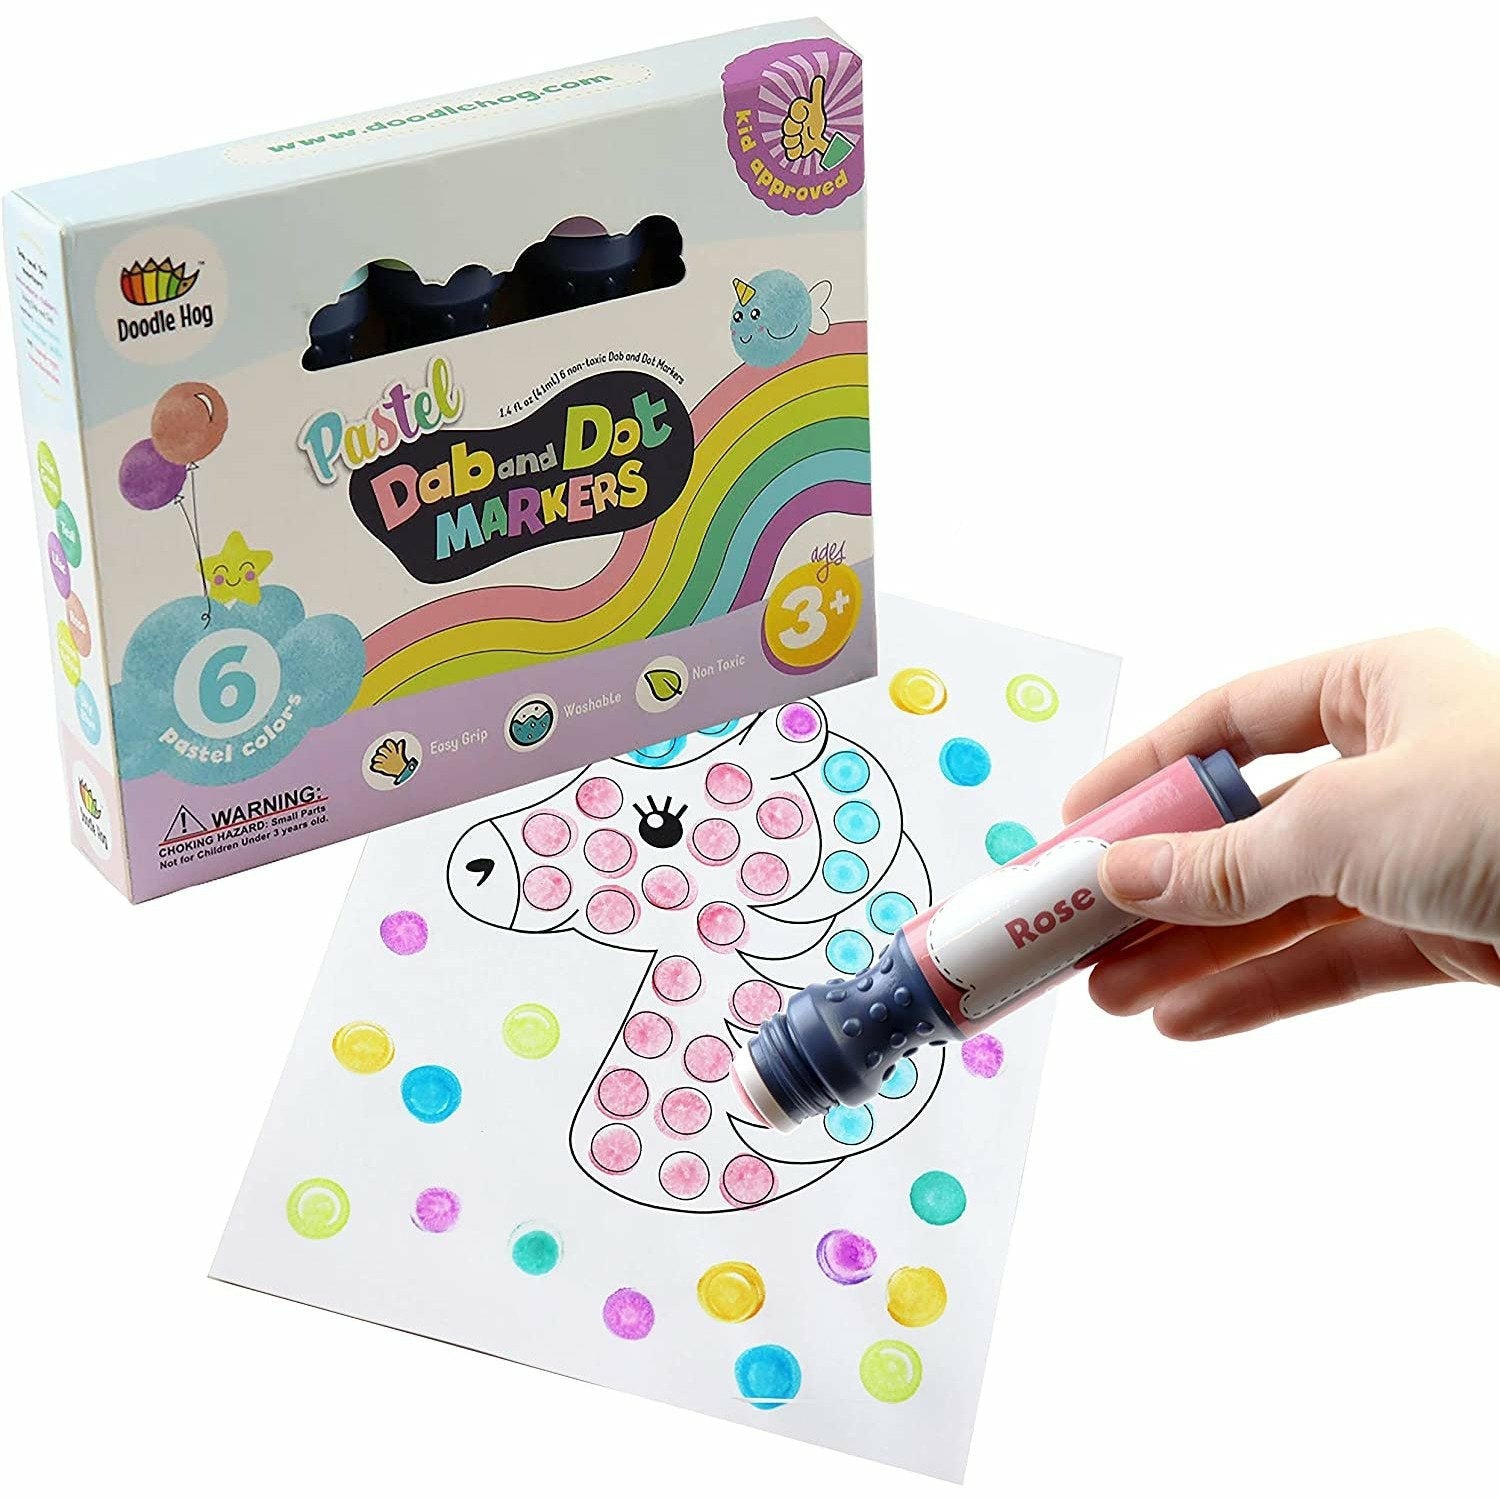 Pastel Washable Dot Art Markers for Toddlers & Kids 3 4 5 6 Years Old, Paint Markers for Creating Unicorn Arts and Crafts. Stocking Stuffers Gift